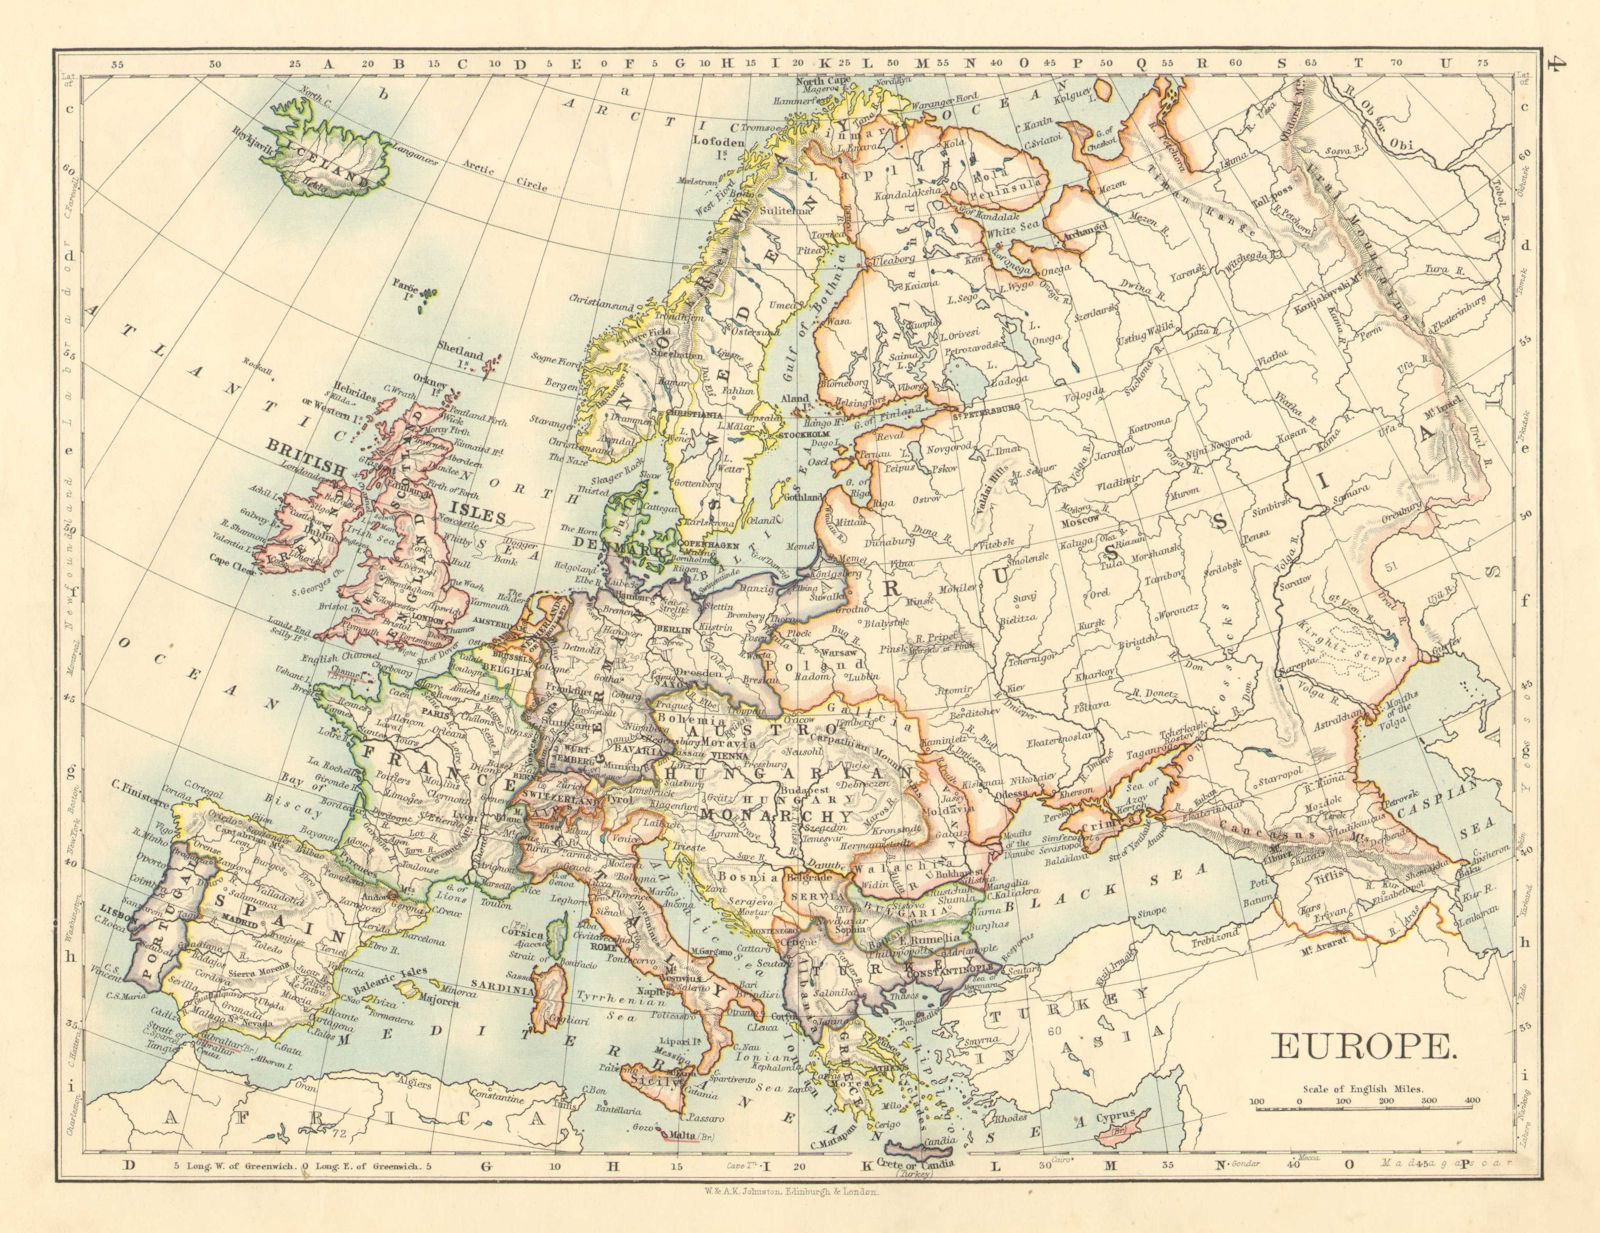 Associate Product EUROPE POLITICAL. Austria-Hungary. United Sweden & Norway. JOHNSTON 1899 map